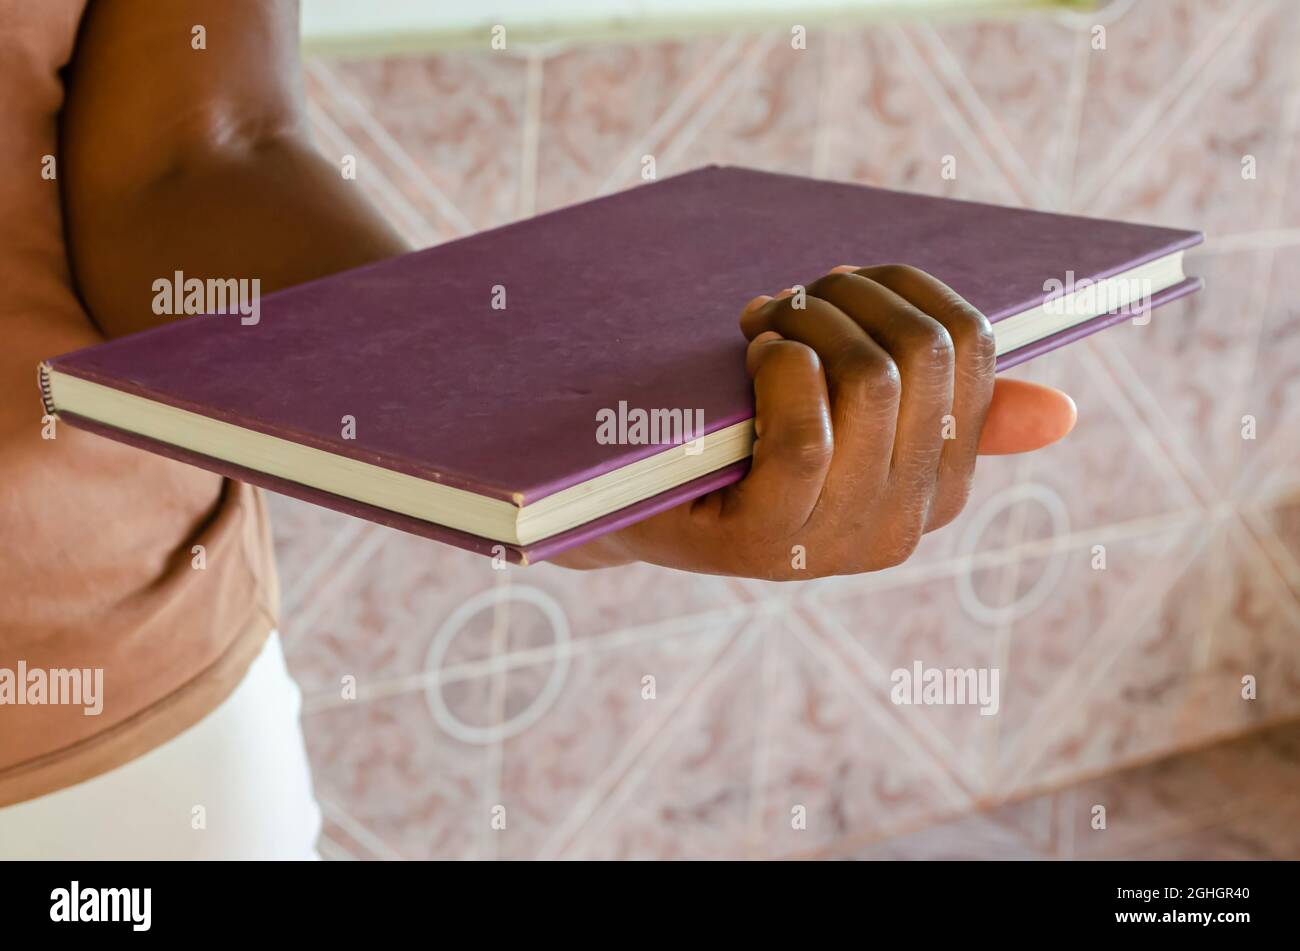 Holding A Closed Bound Book Stock Photo